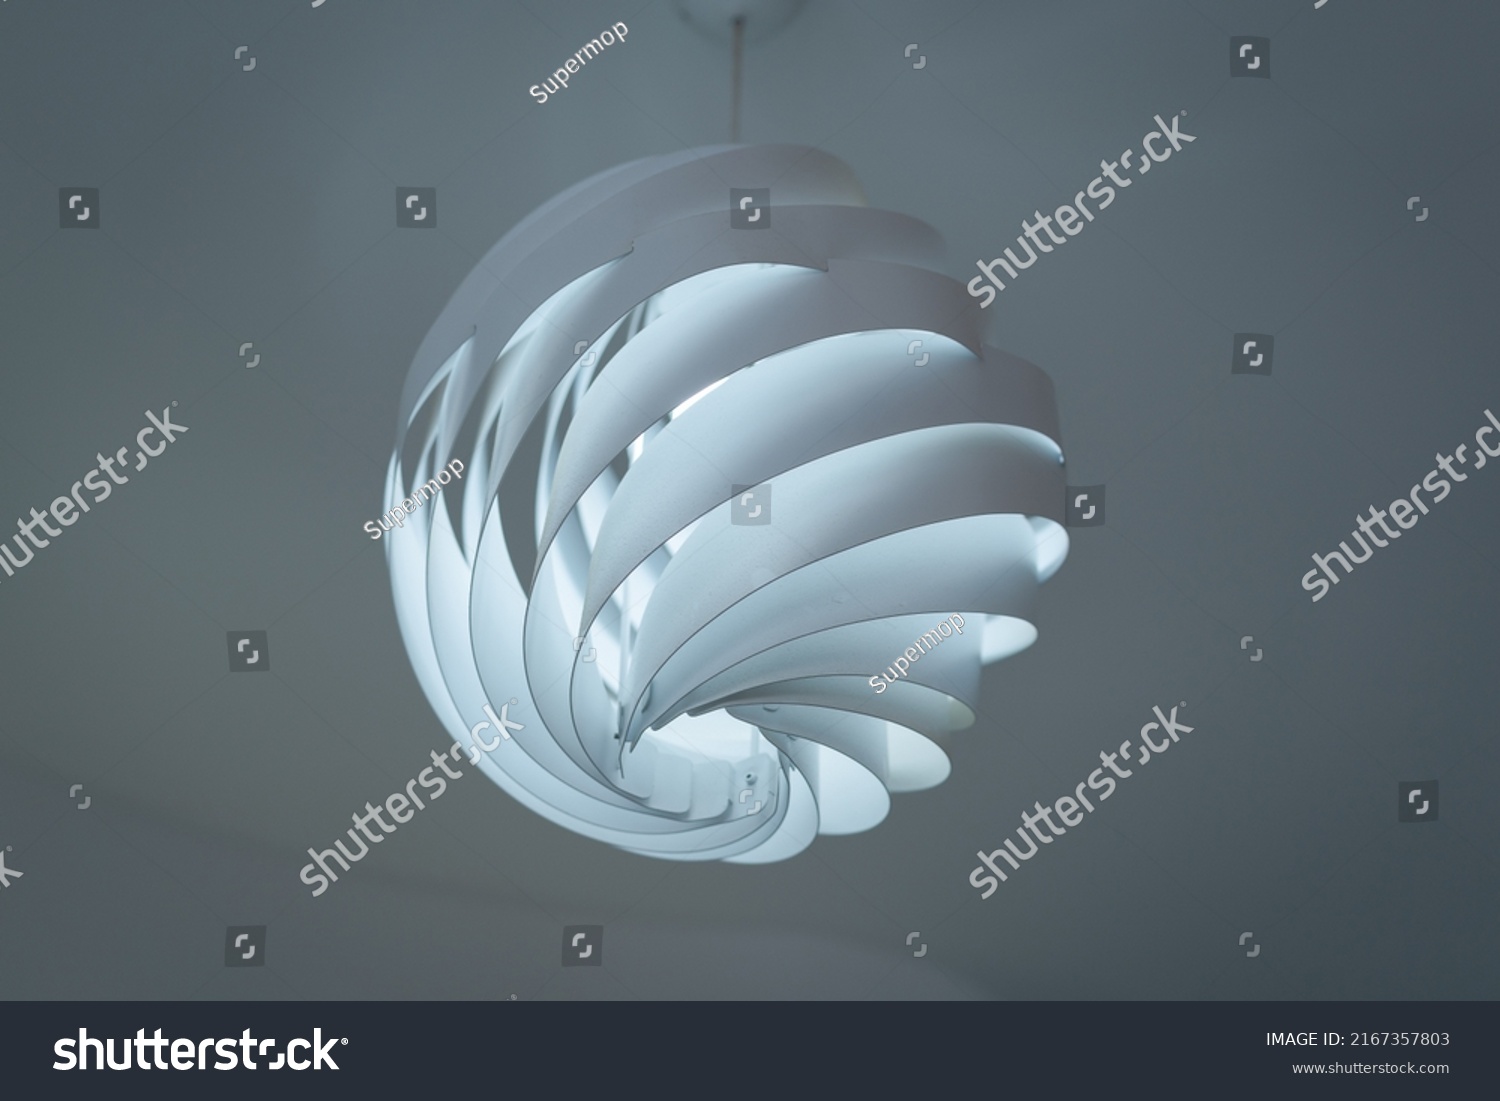 Modern ceiling lamps and light bulbs ball shape decoration for home and living from the plastic sheet sphere spiral shape geometry pattern. Concept interior building contemporary. #2167357803